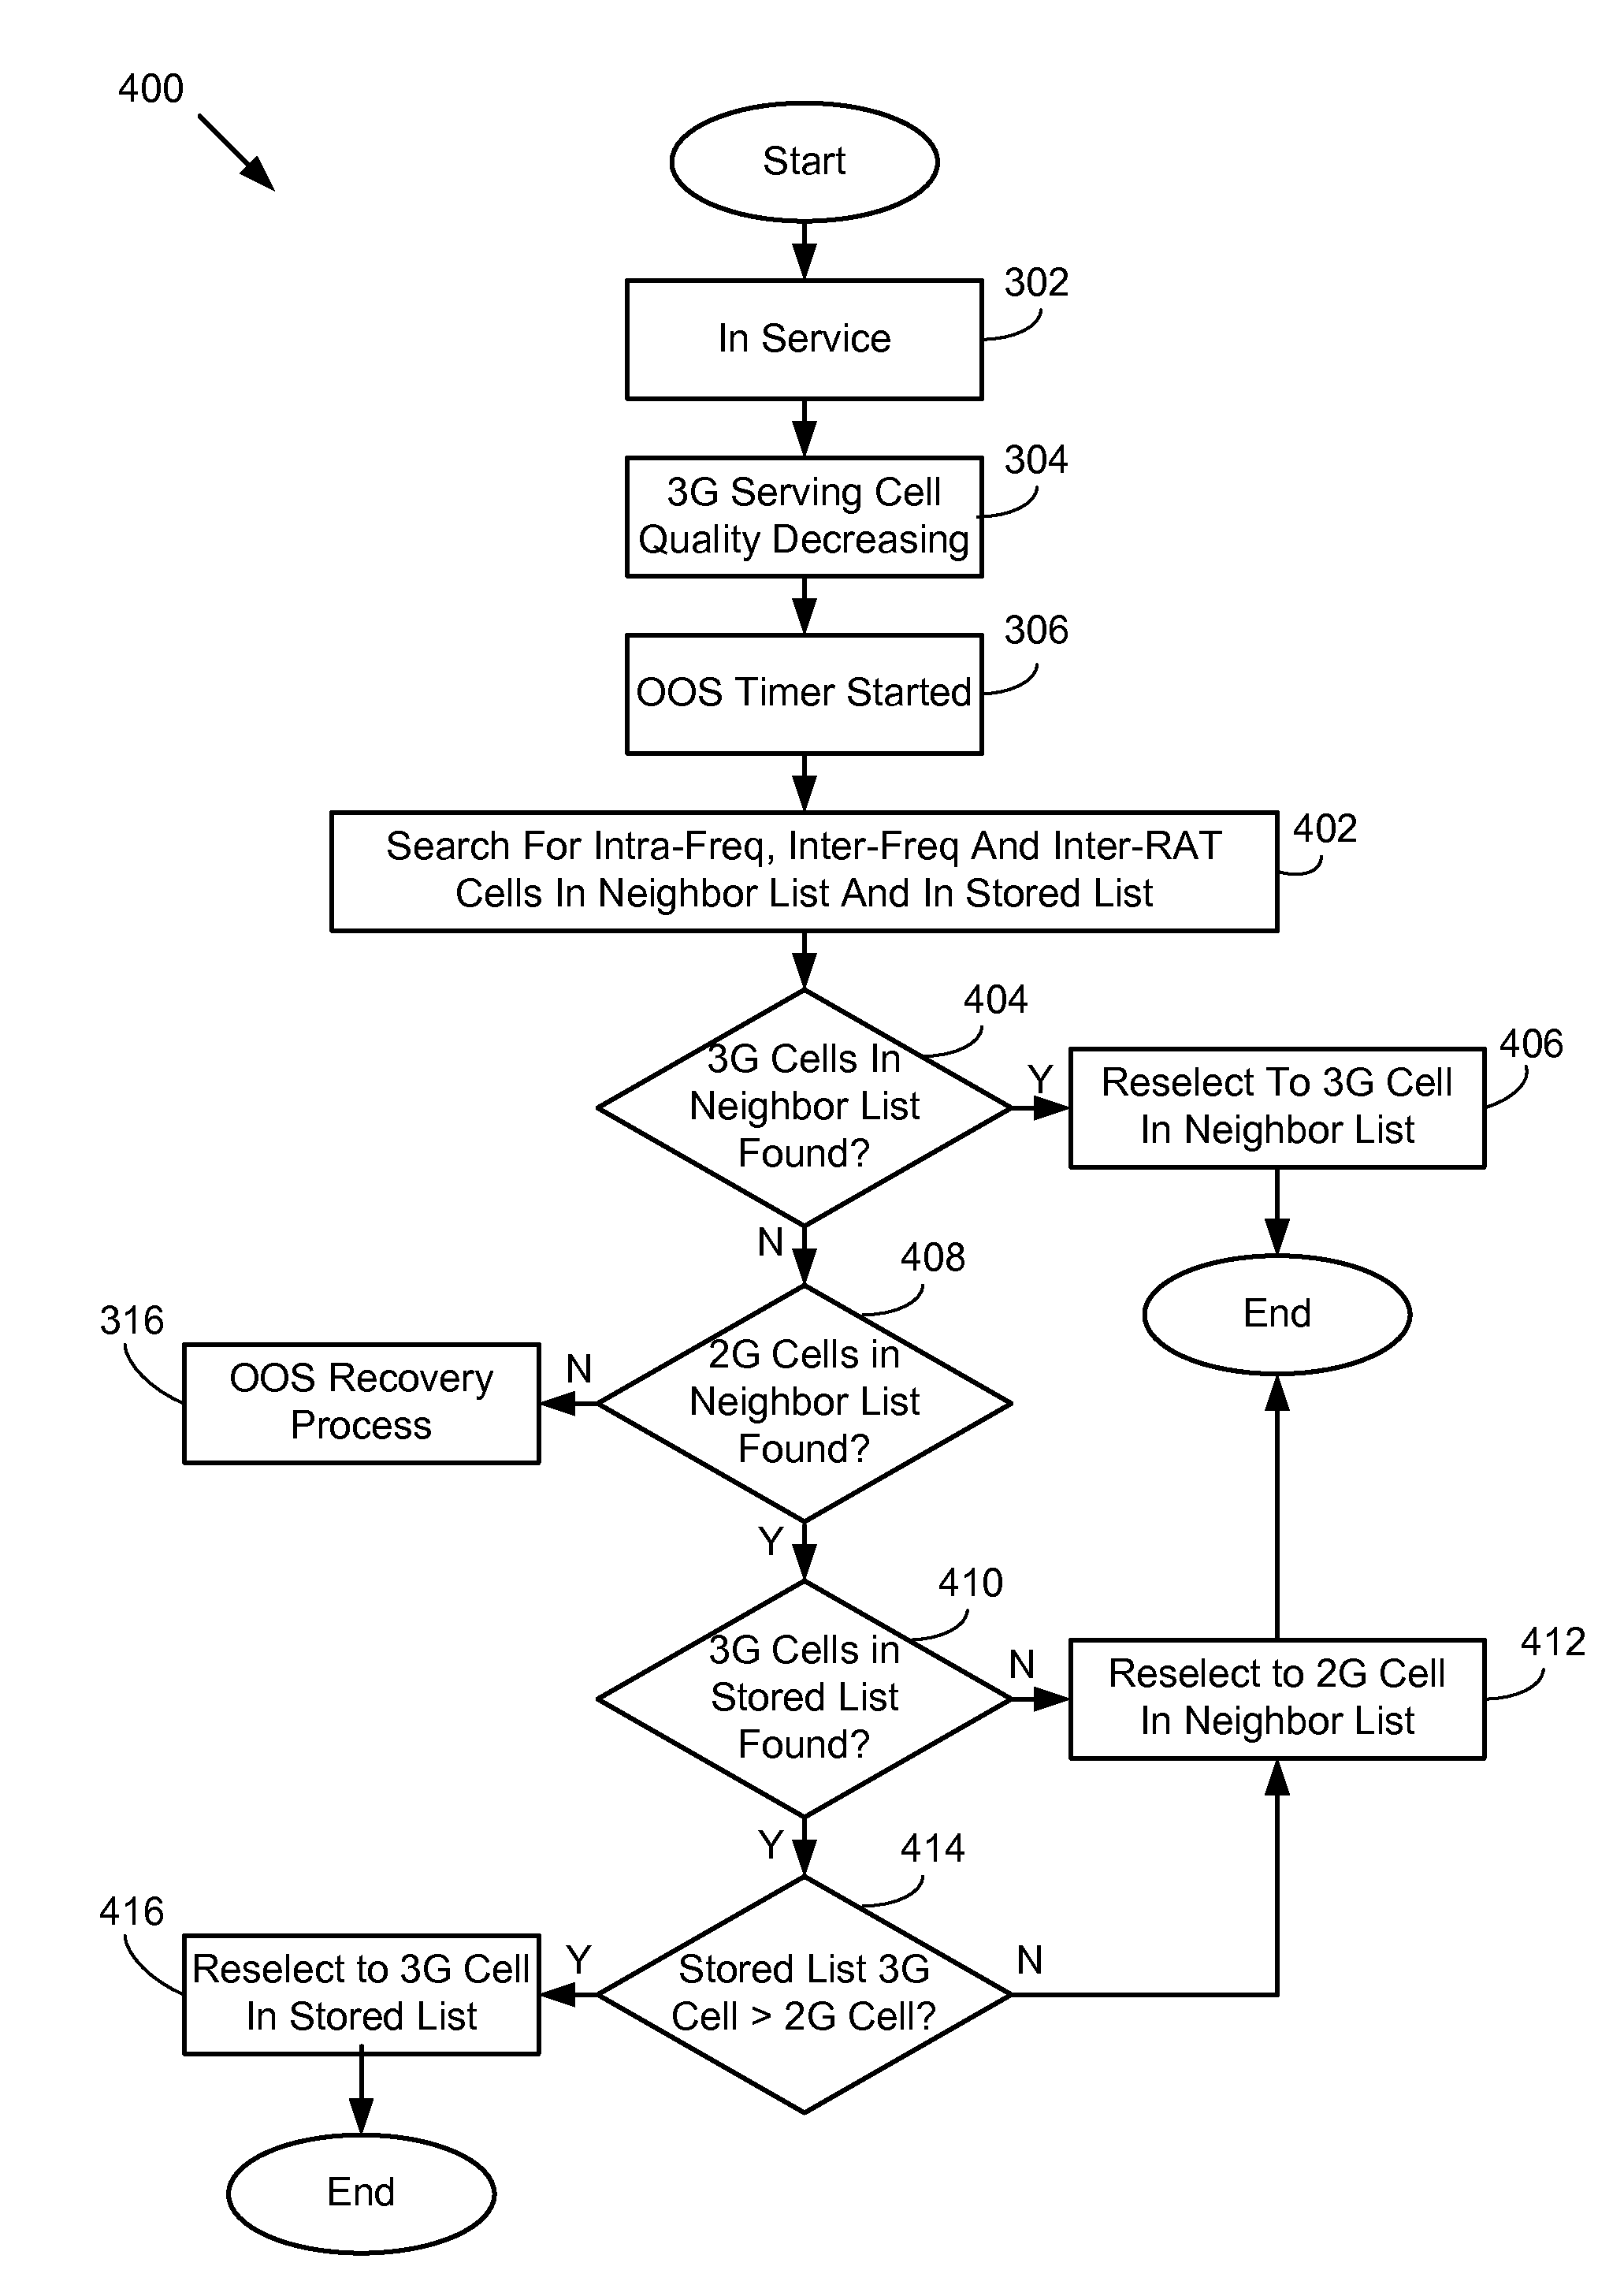 Expanded cell search and selection in a mobile wireless device